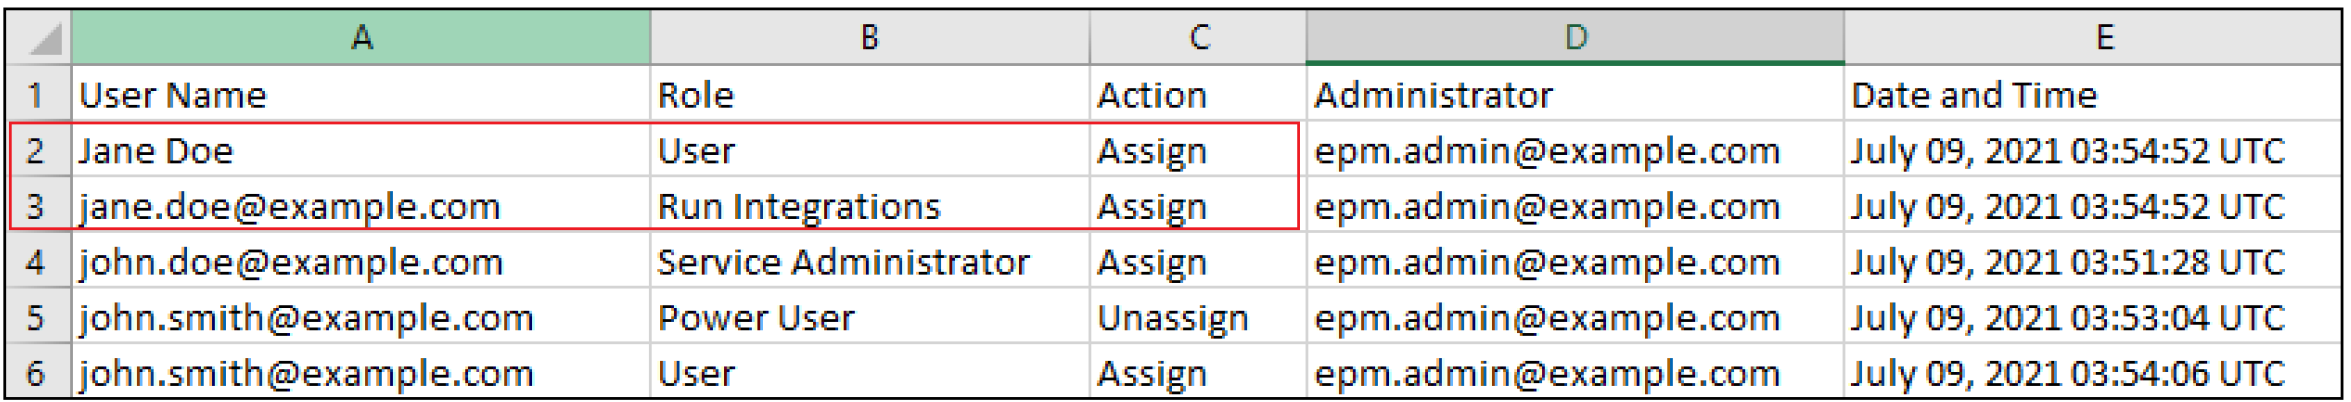 Sample Role Assignment Audit report